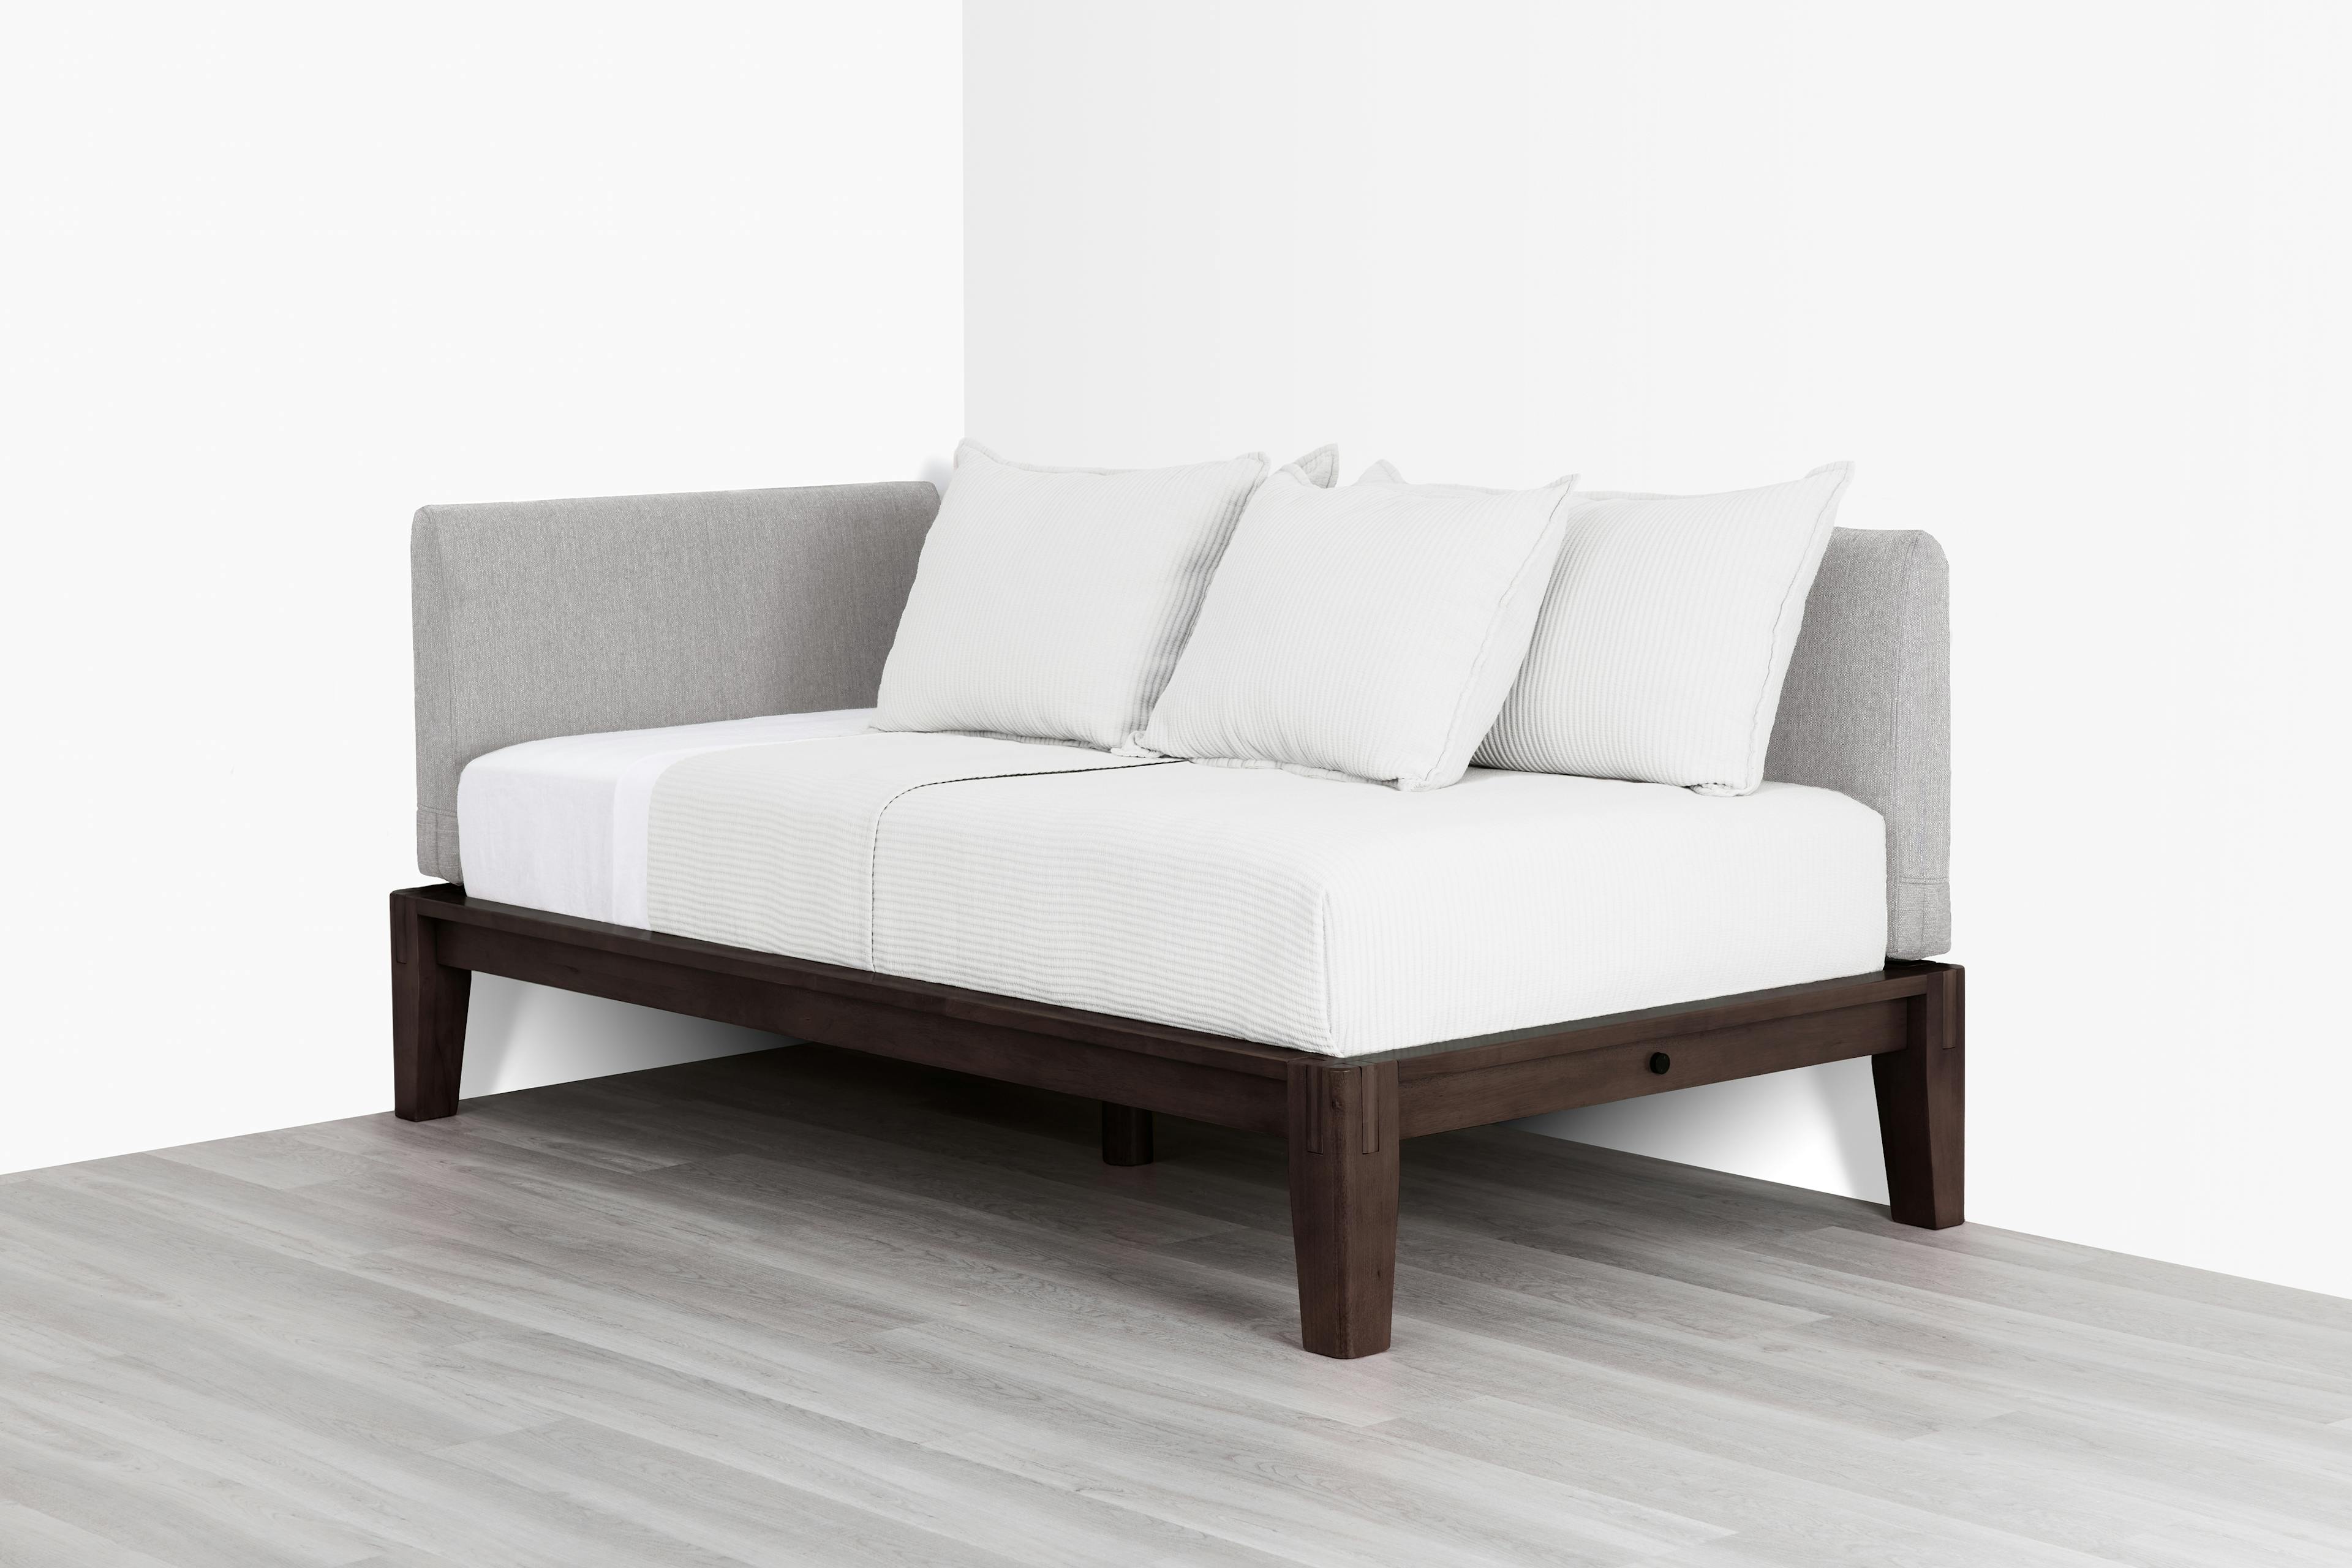 PDP Image: The Daybed (Espresso / Fog Grey) - 3:2 - Pillows, Stacked